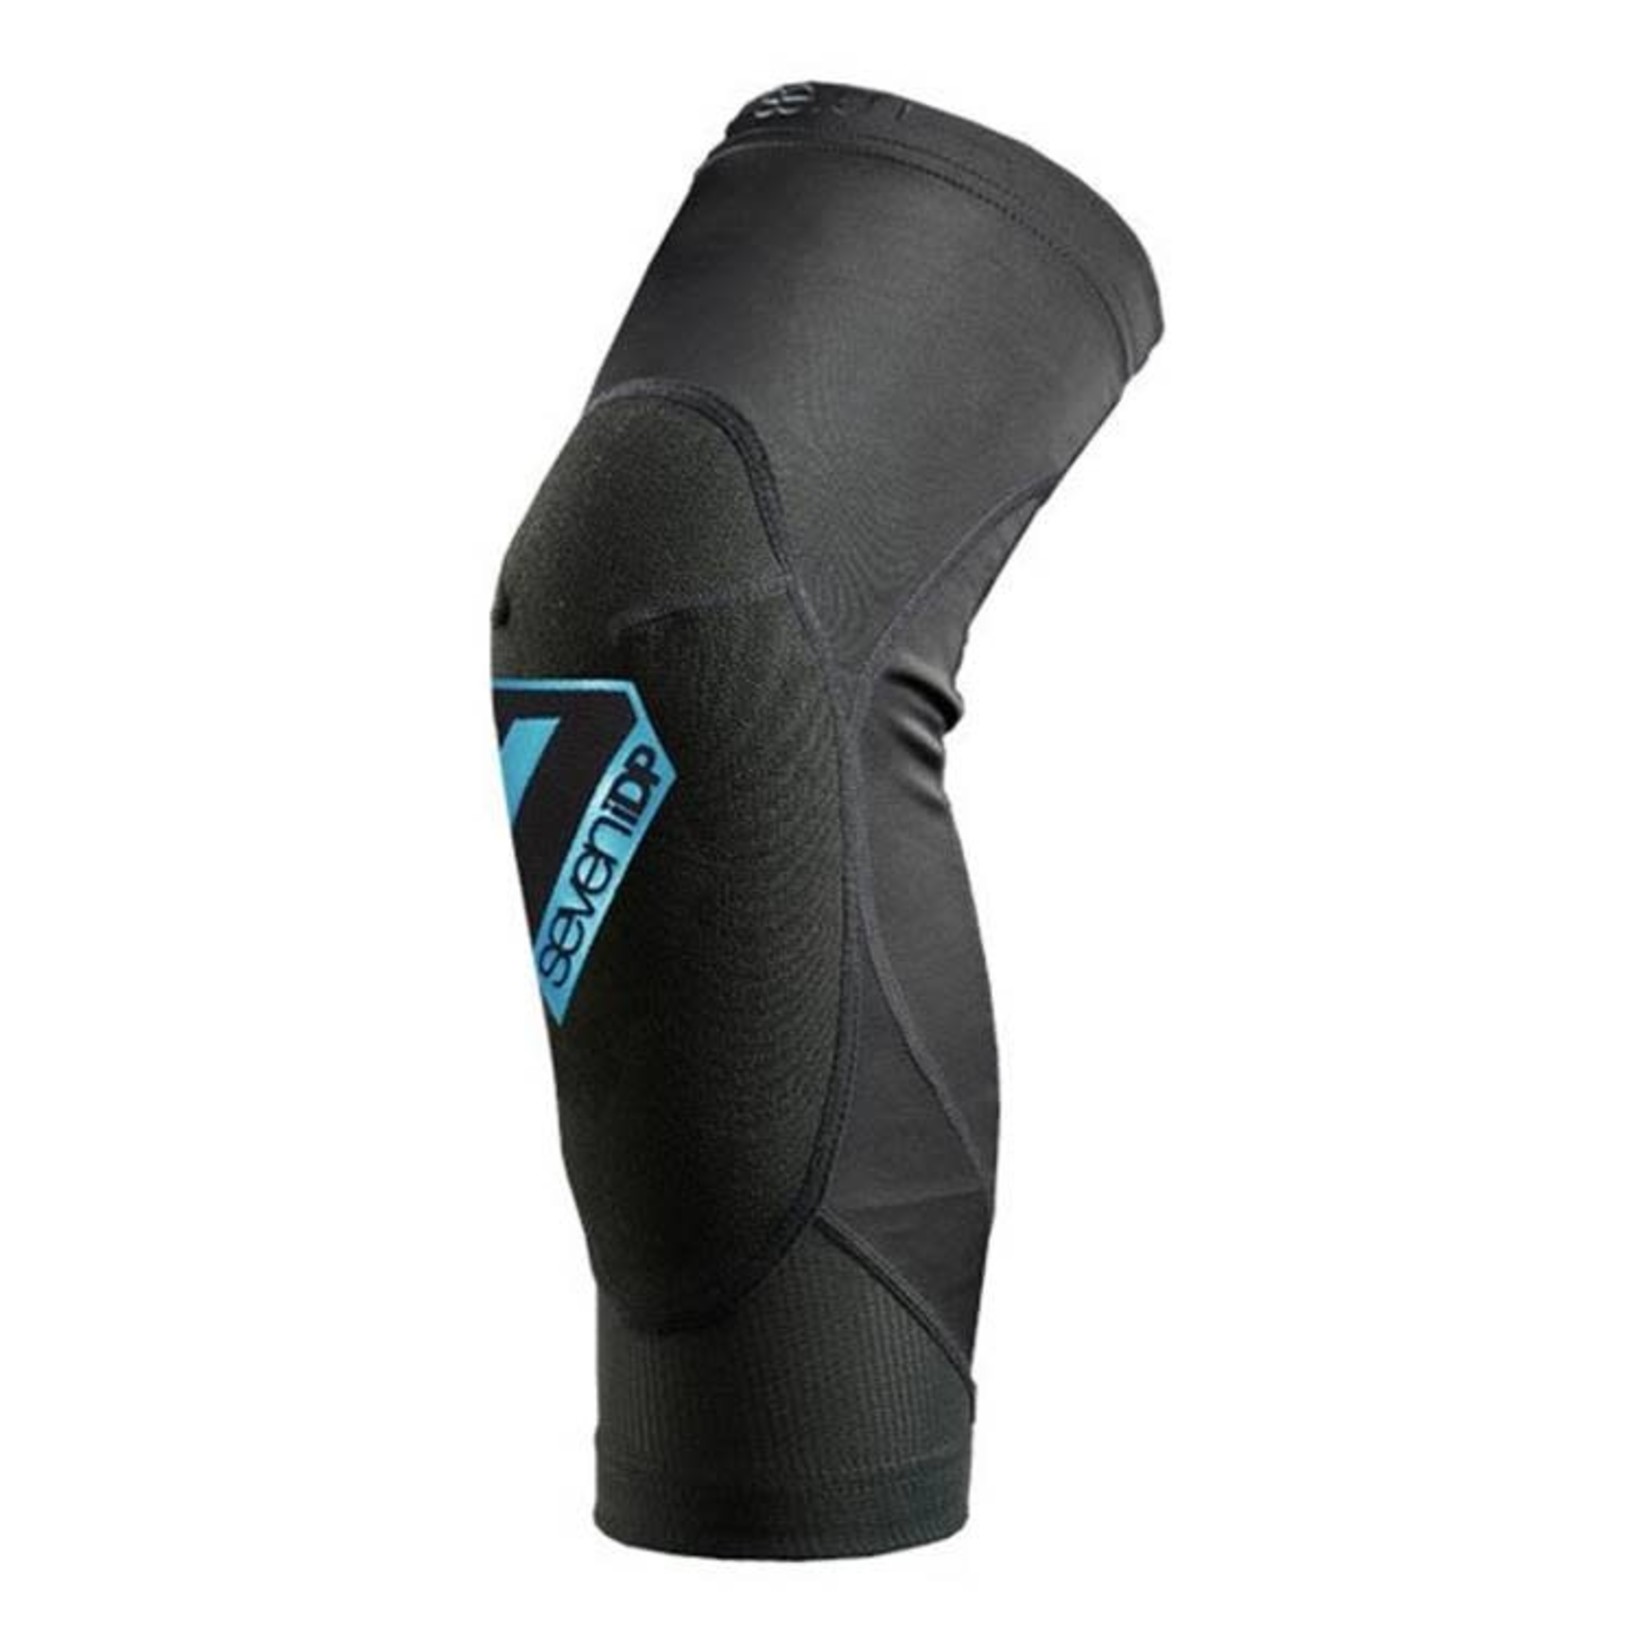 7IDP 7IDP Youth Transition Knee Pads